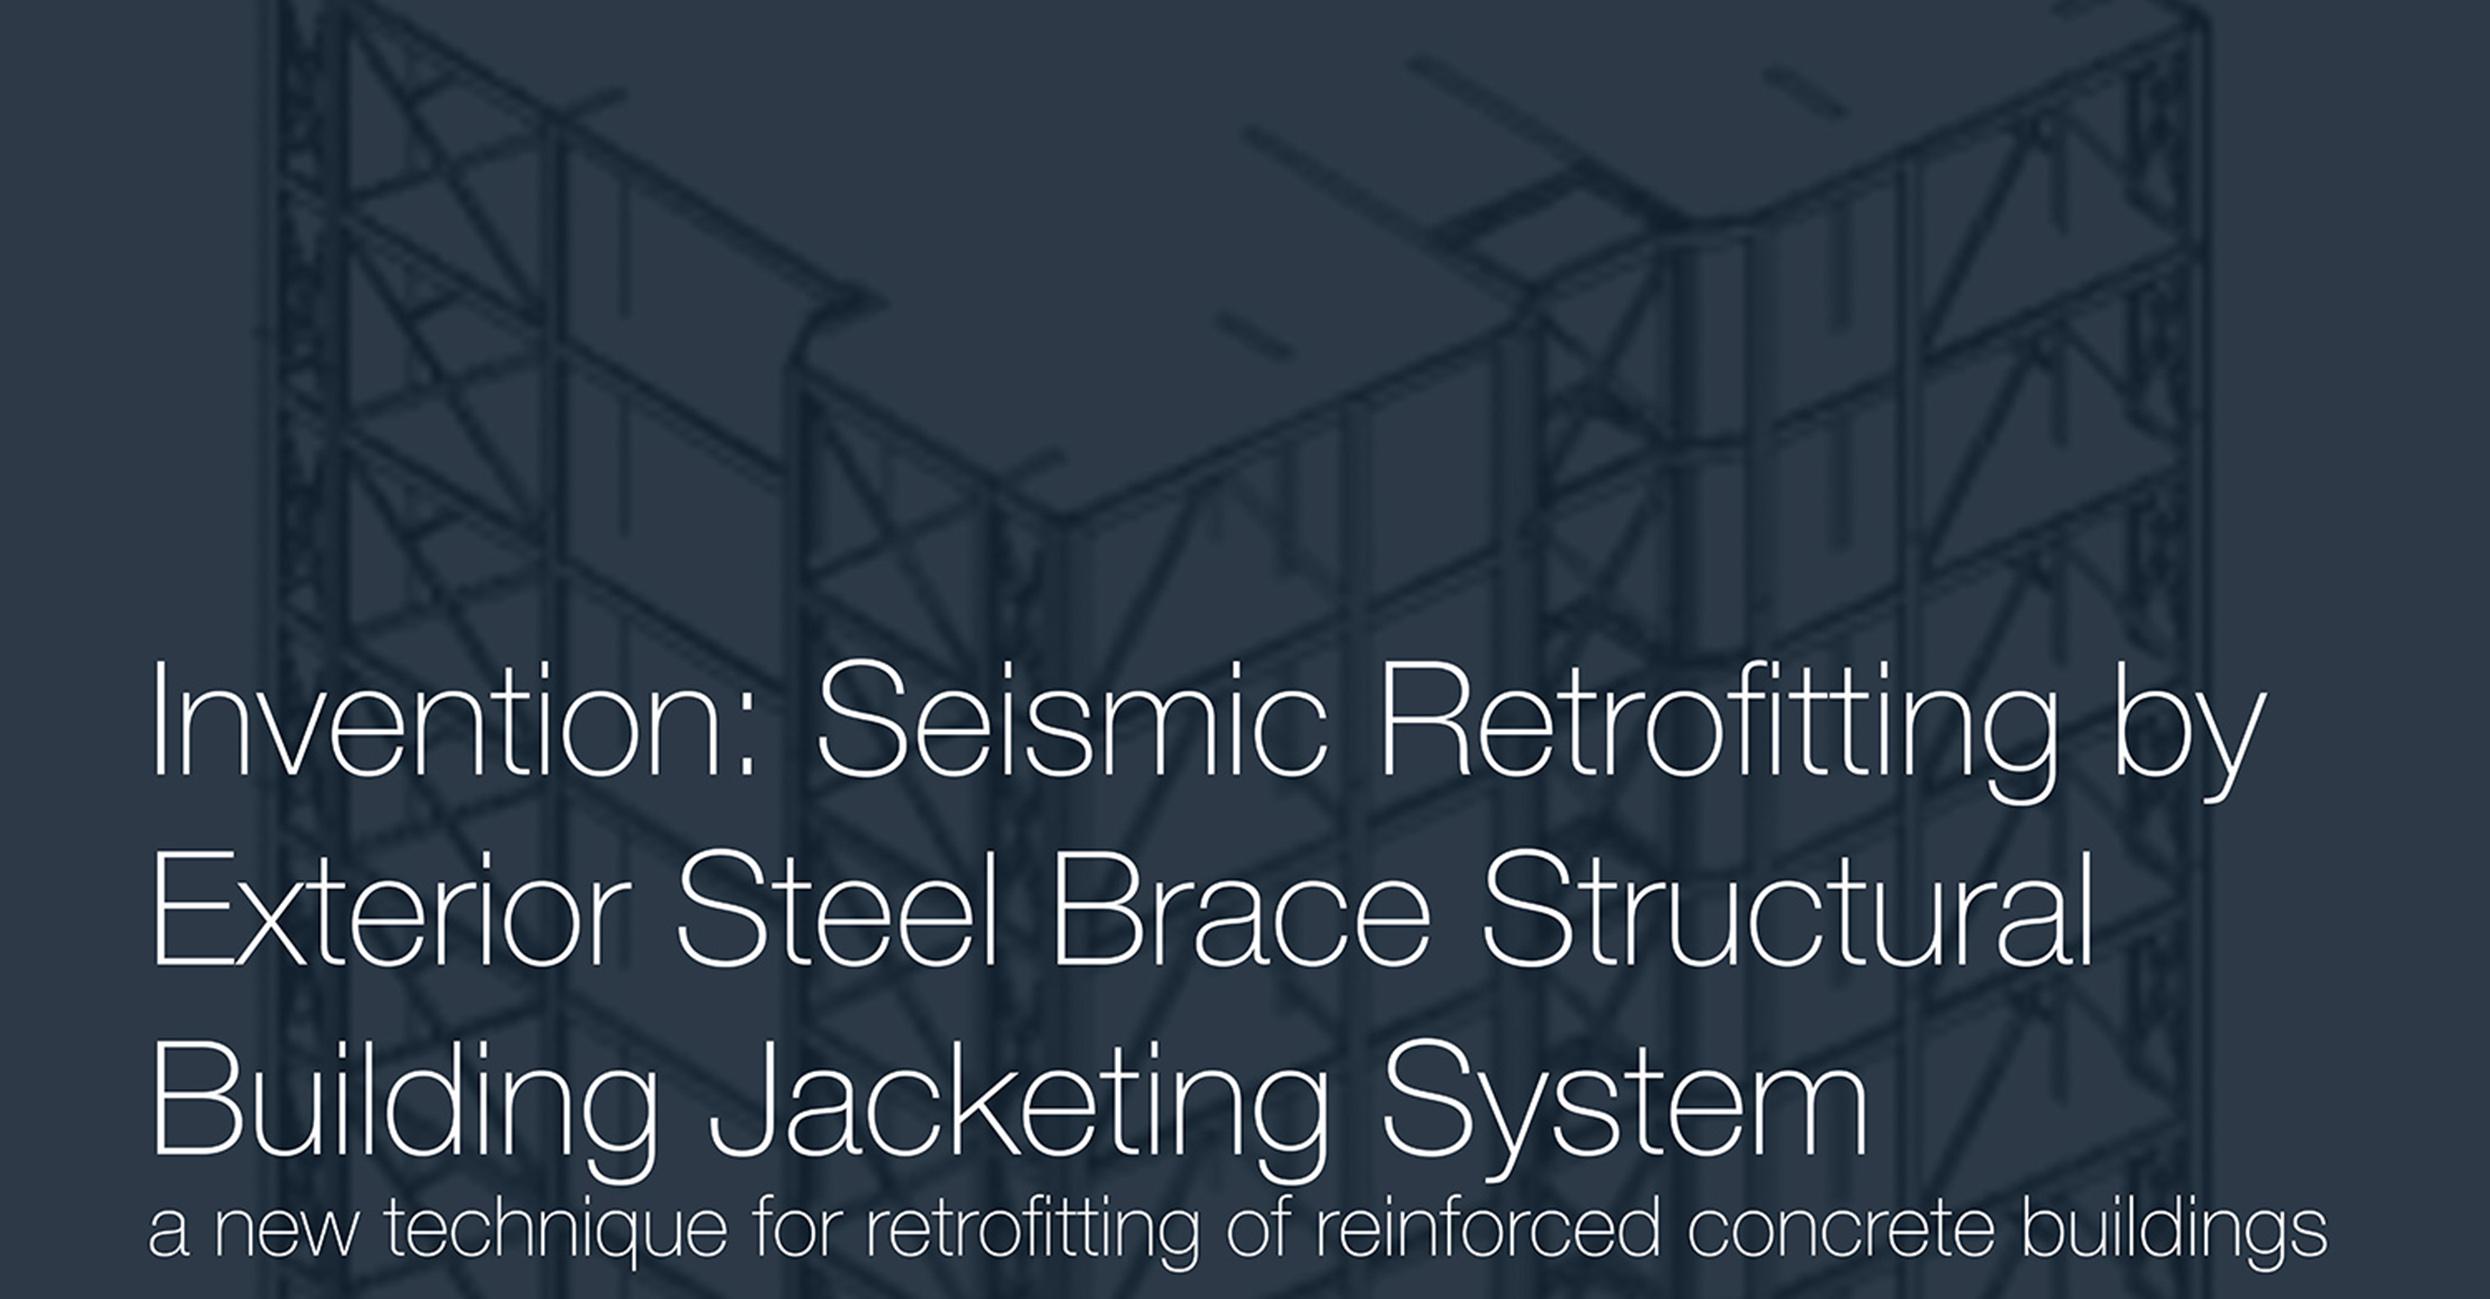 Invention: Seismic Retrofitting by Exterior Steel Brace Structural Building Jacketing System: A new technique for retrofitting of reinforced concrete buildings